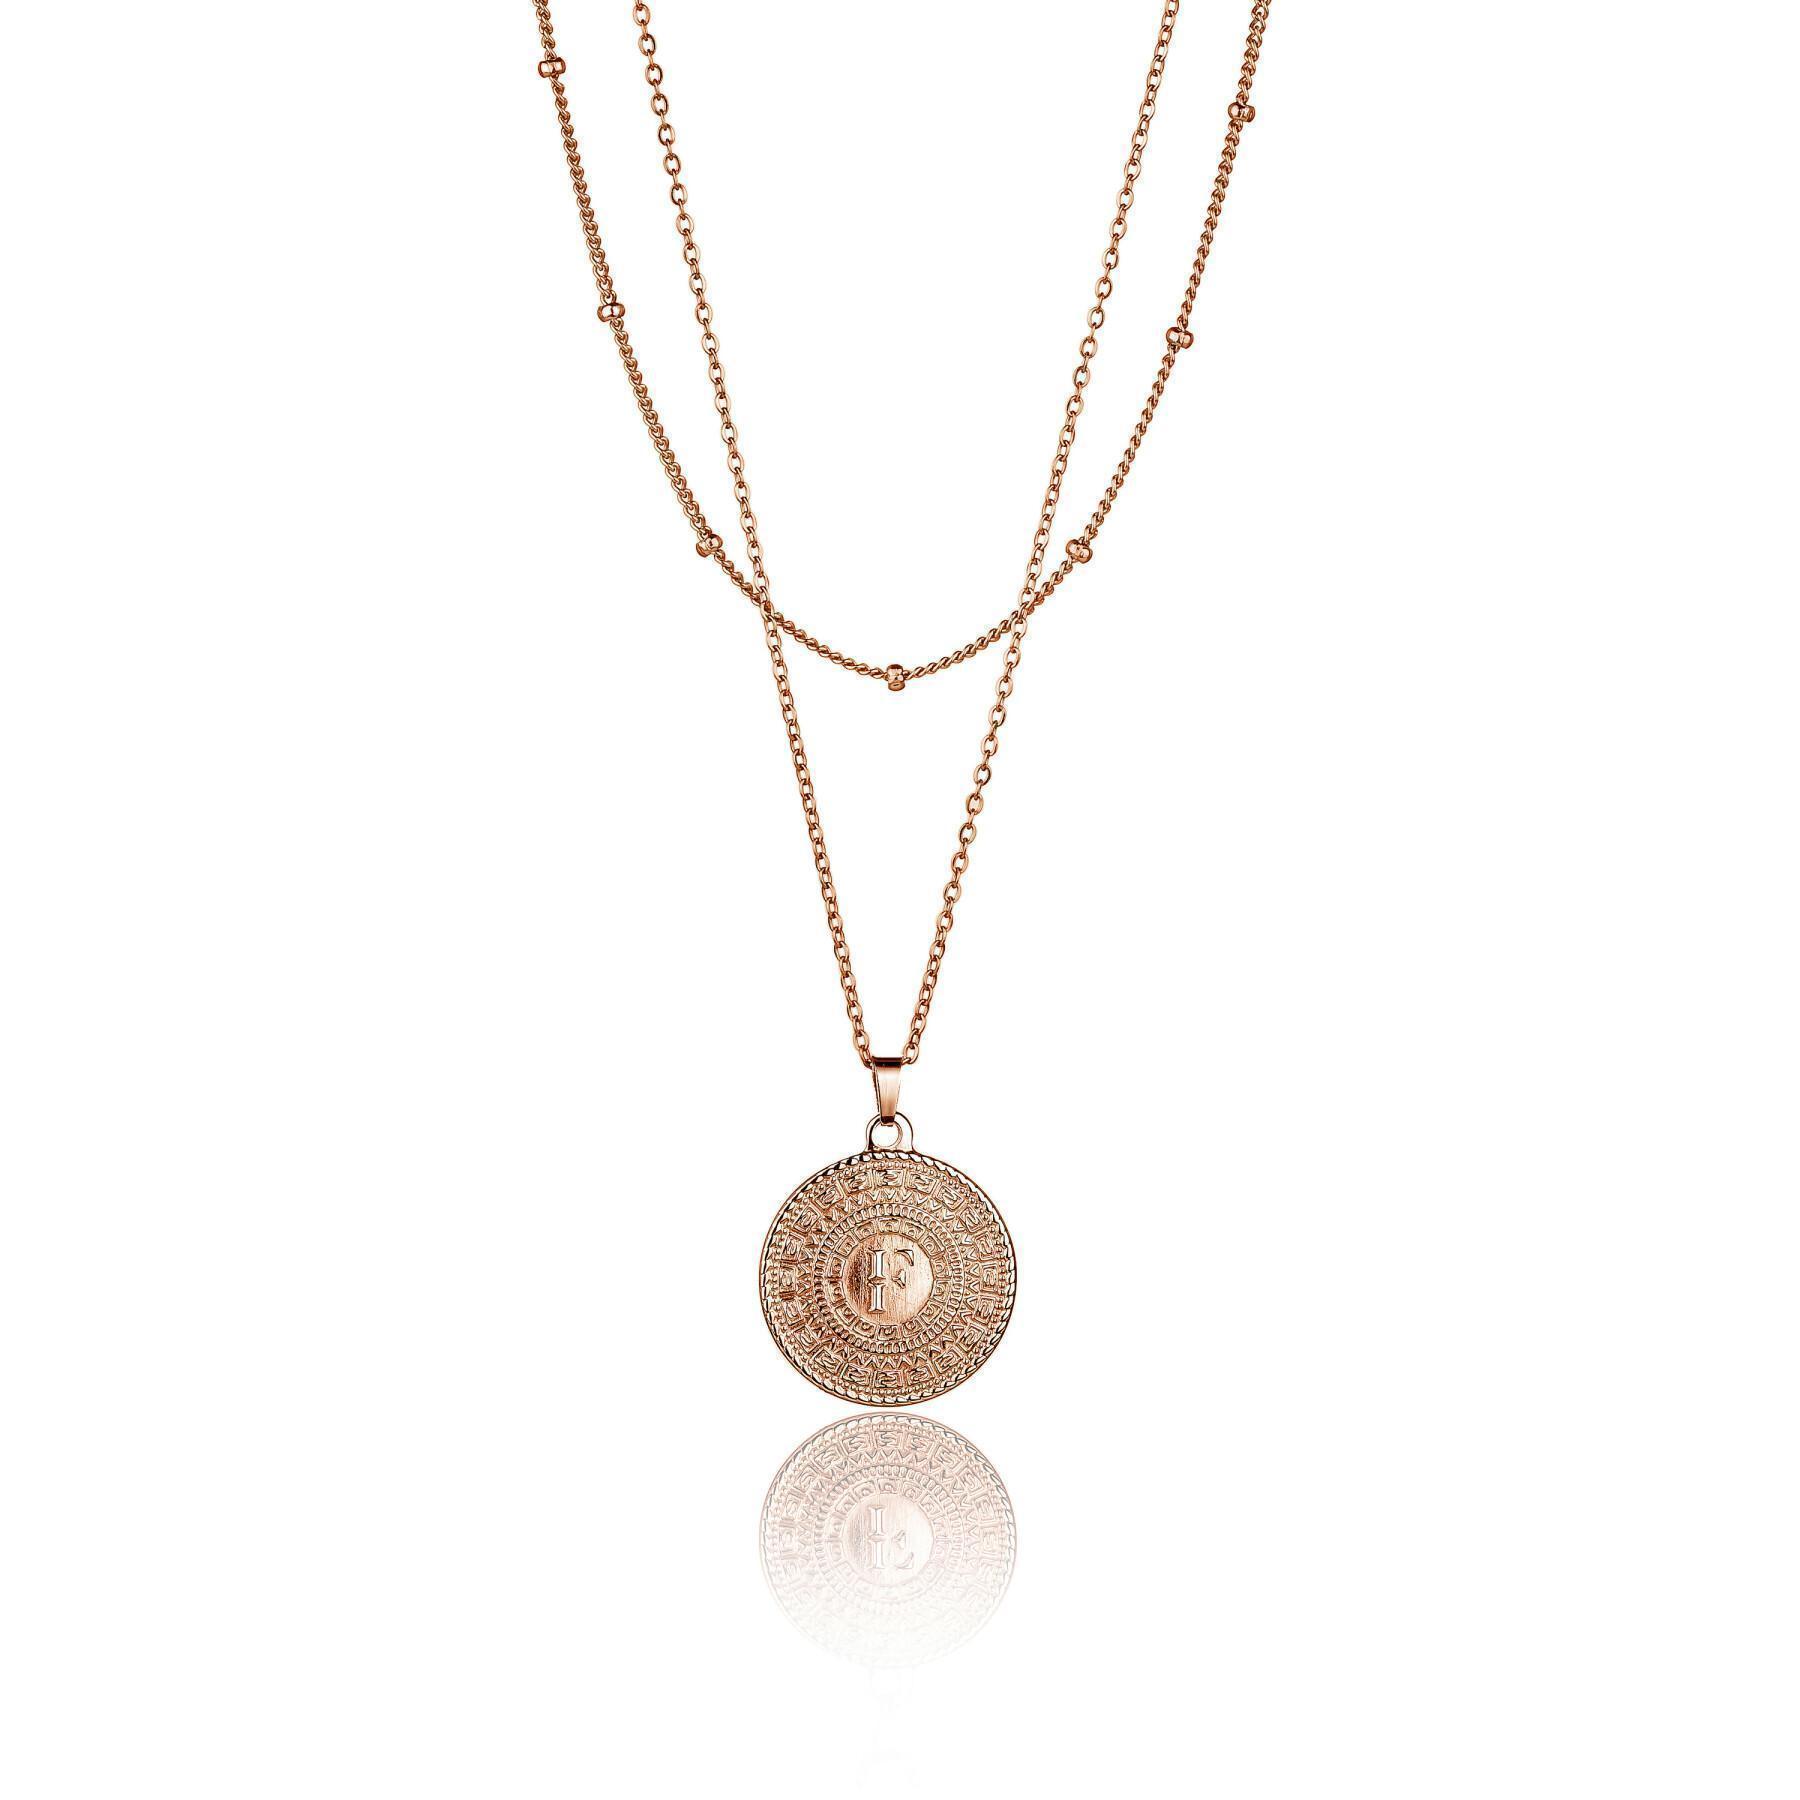 Women's necklace Isabella Ford Brie